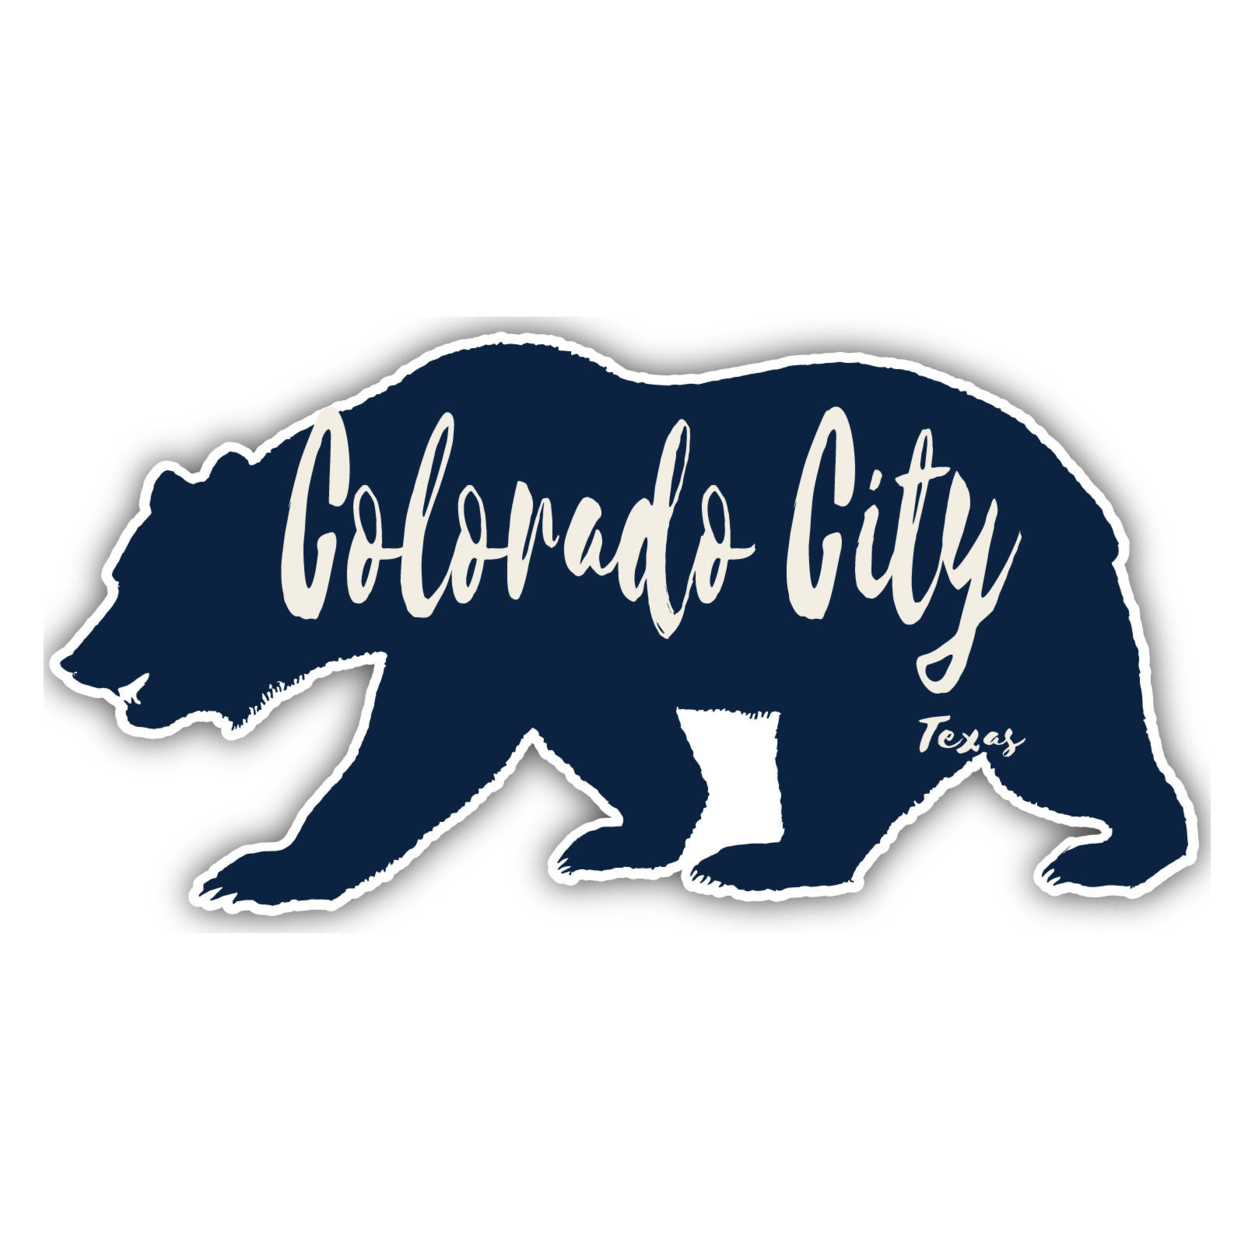 Colorado City Texas Souvenir Decorative Stickers (Choose Theme And Size) - Single Unit, 2-Inch, Great Outdoors